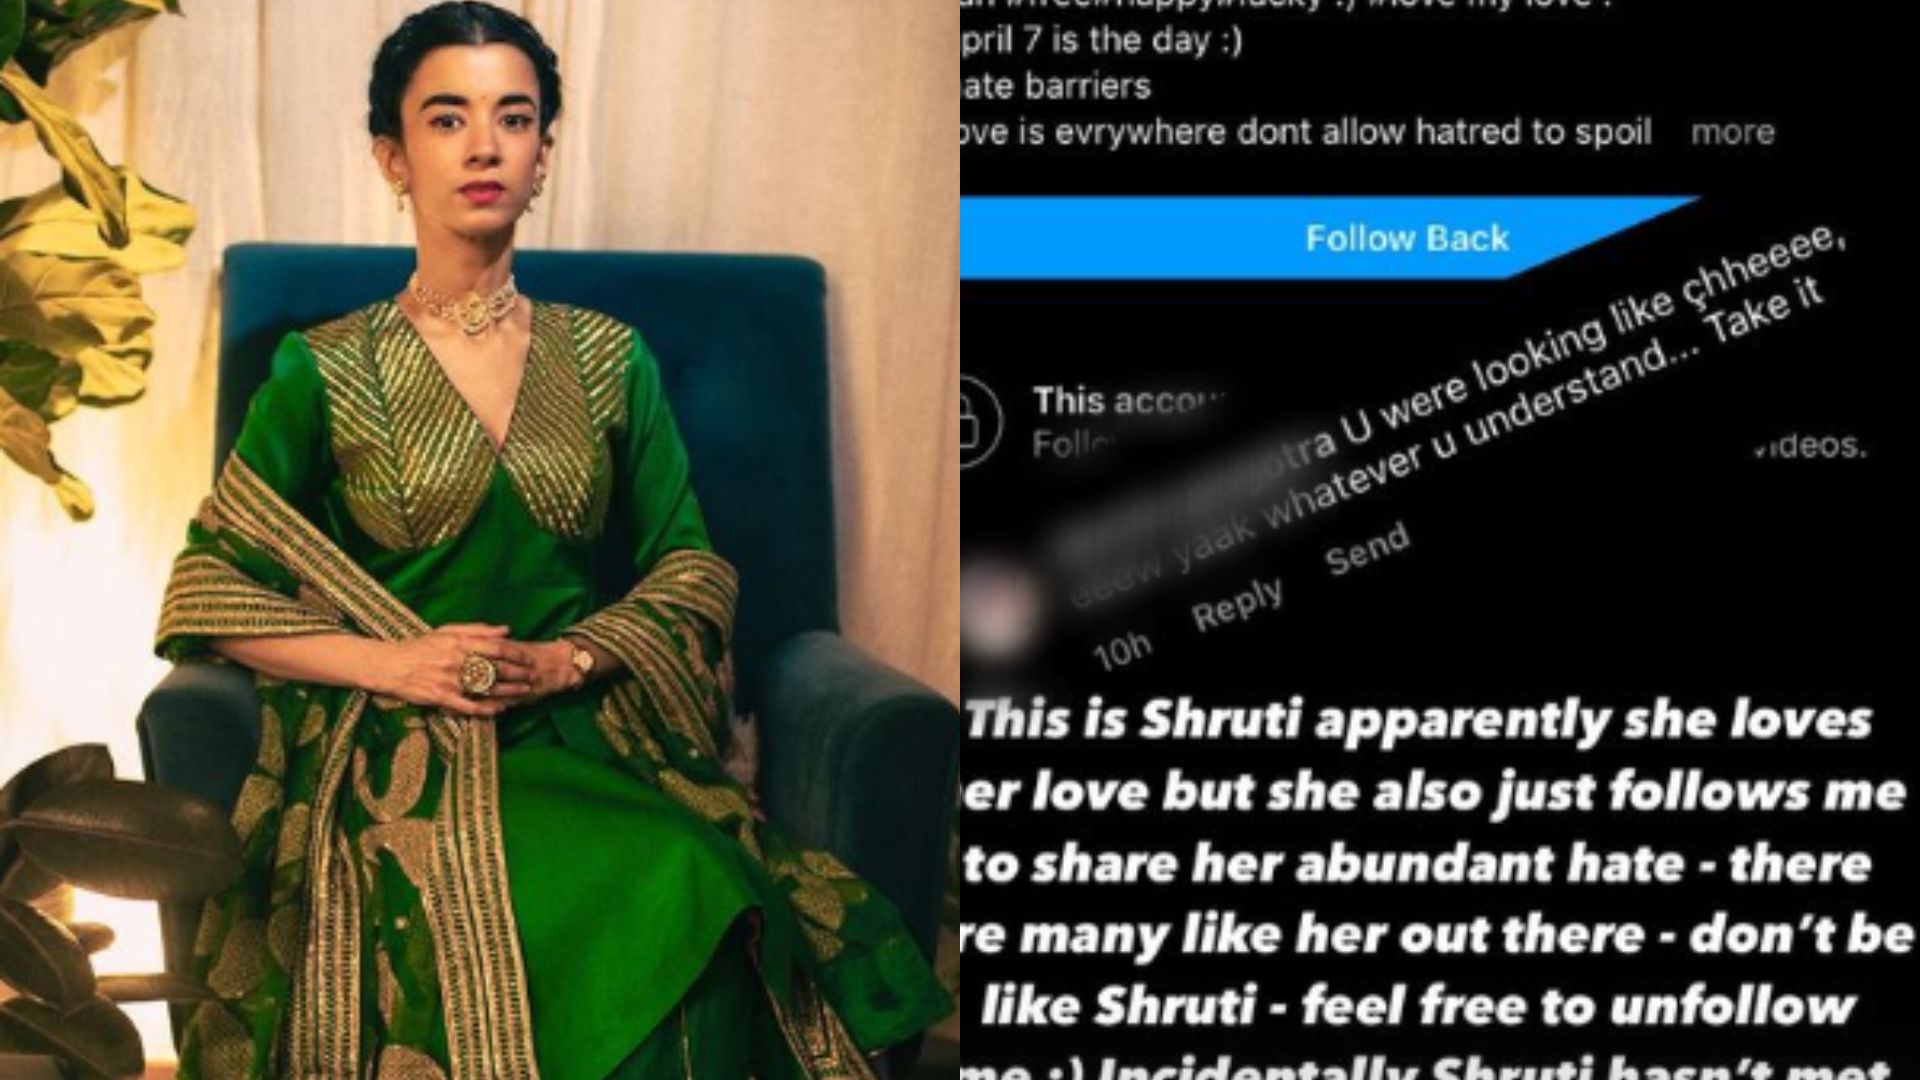 Saba Azad Correctly Deals With Troll Commenting “Yuck” And “Eeww” On Her Latest Pictures. Listen Trolls, High-Time You Learn!